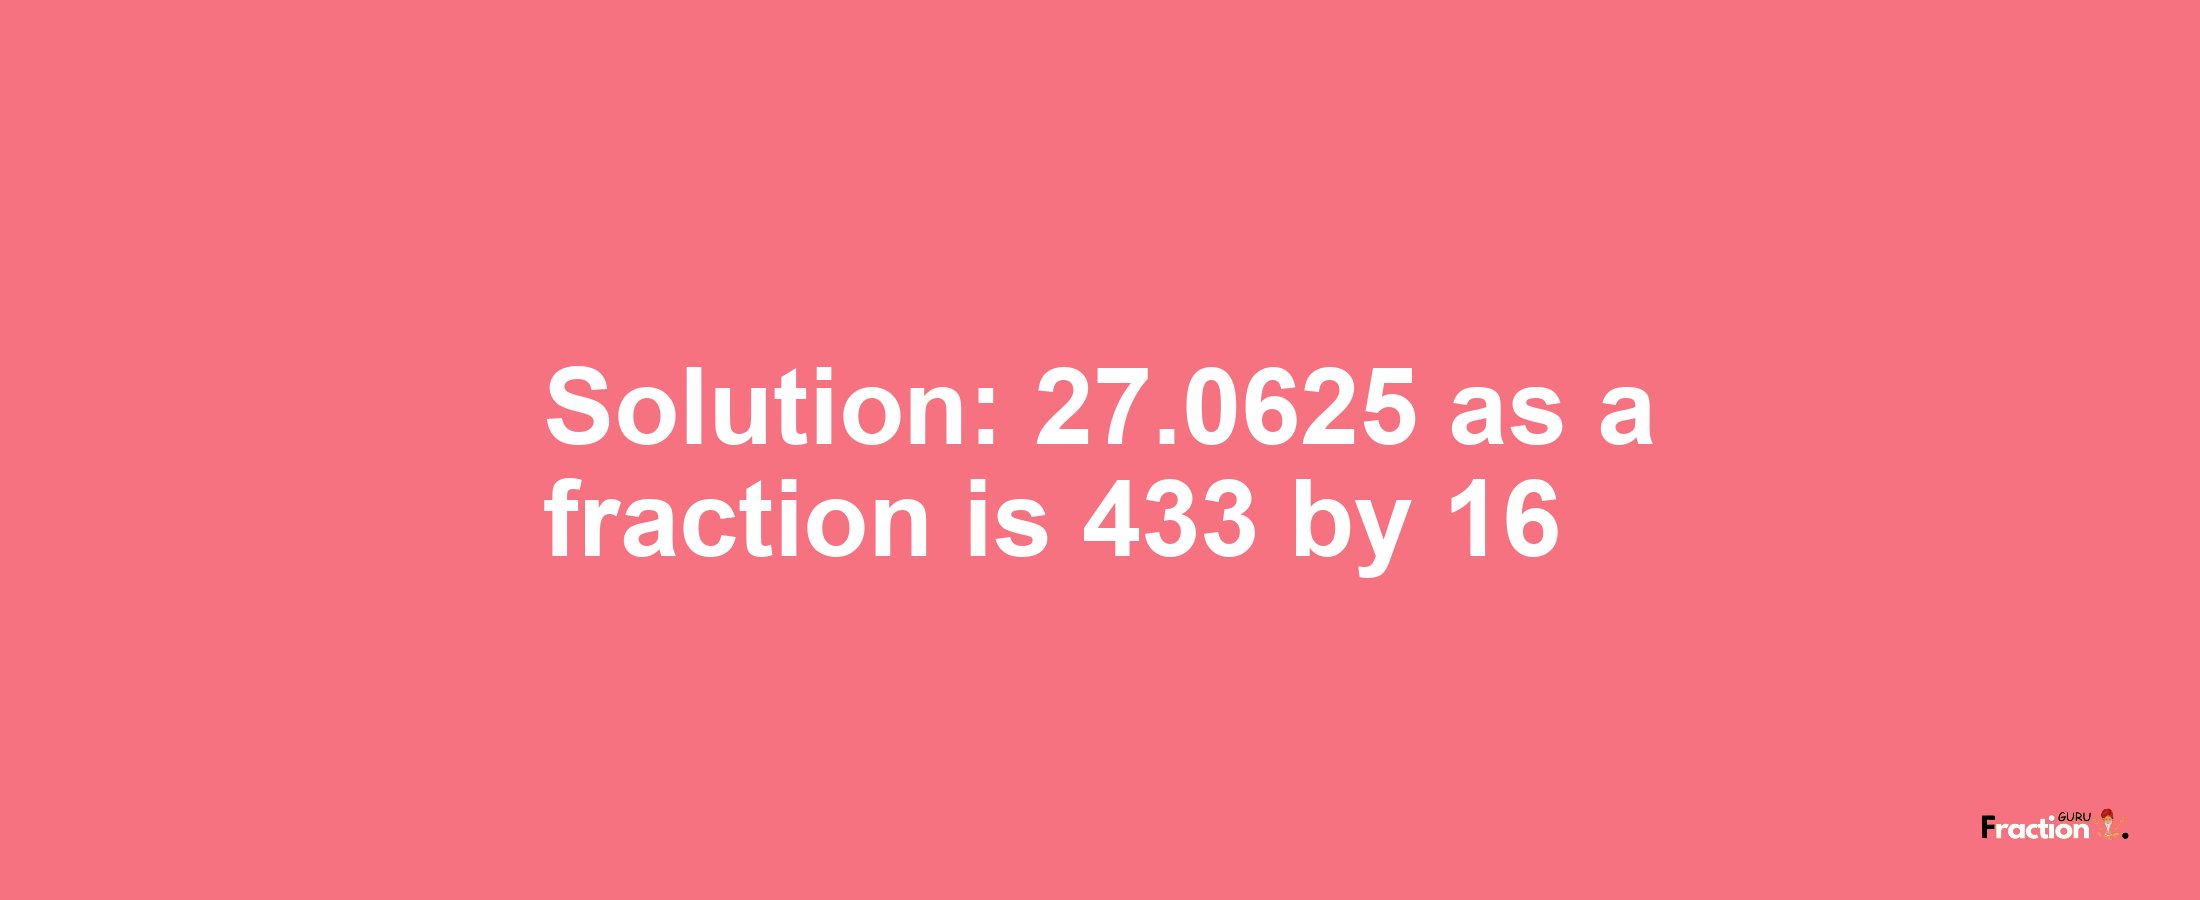 Solution:27.0625 as a fraction is 433/16